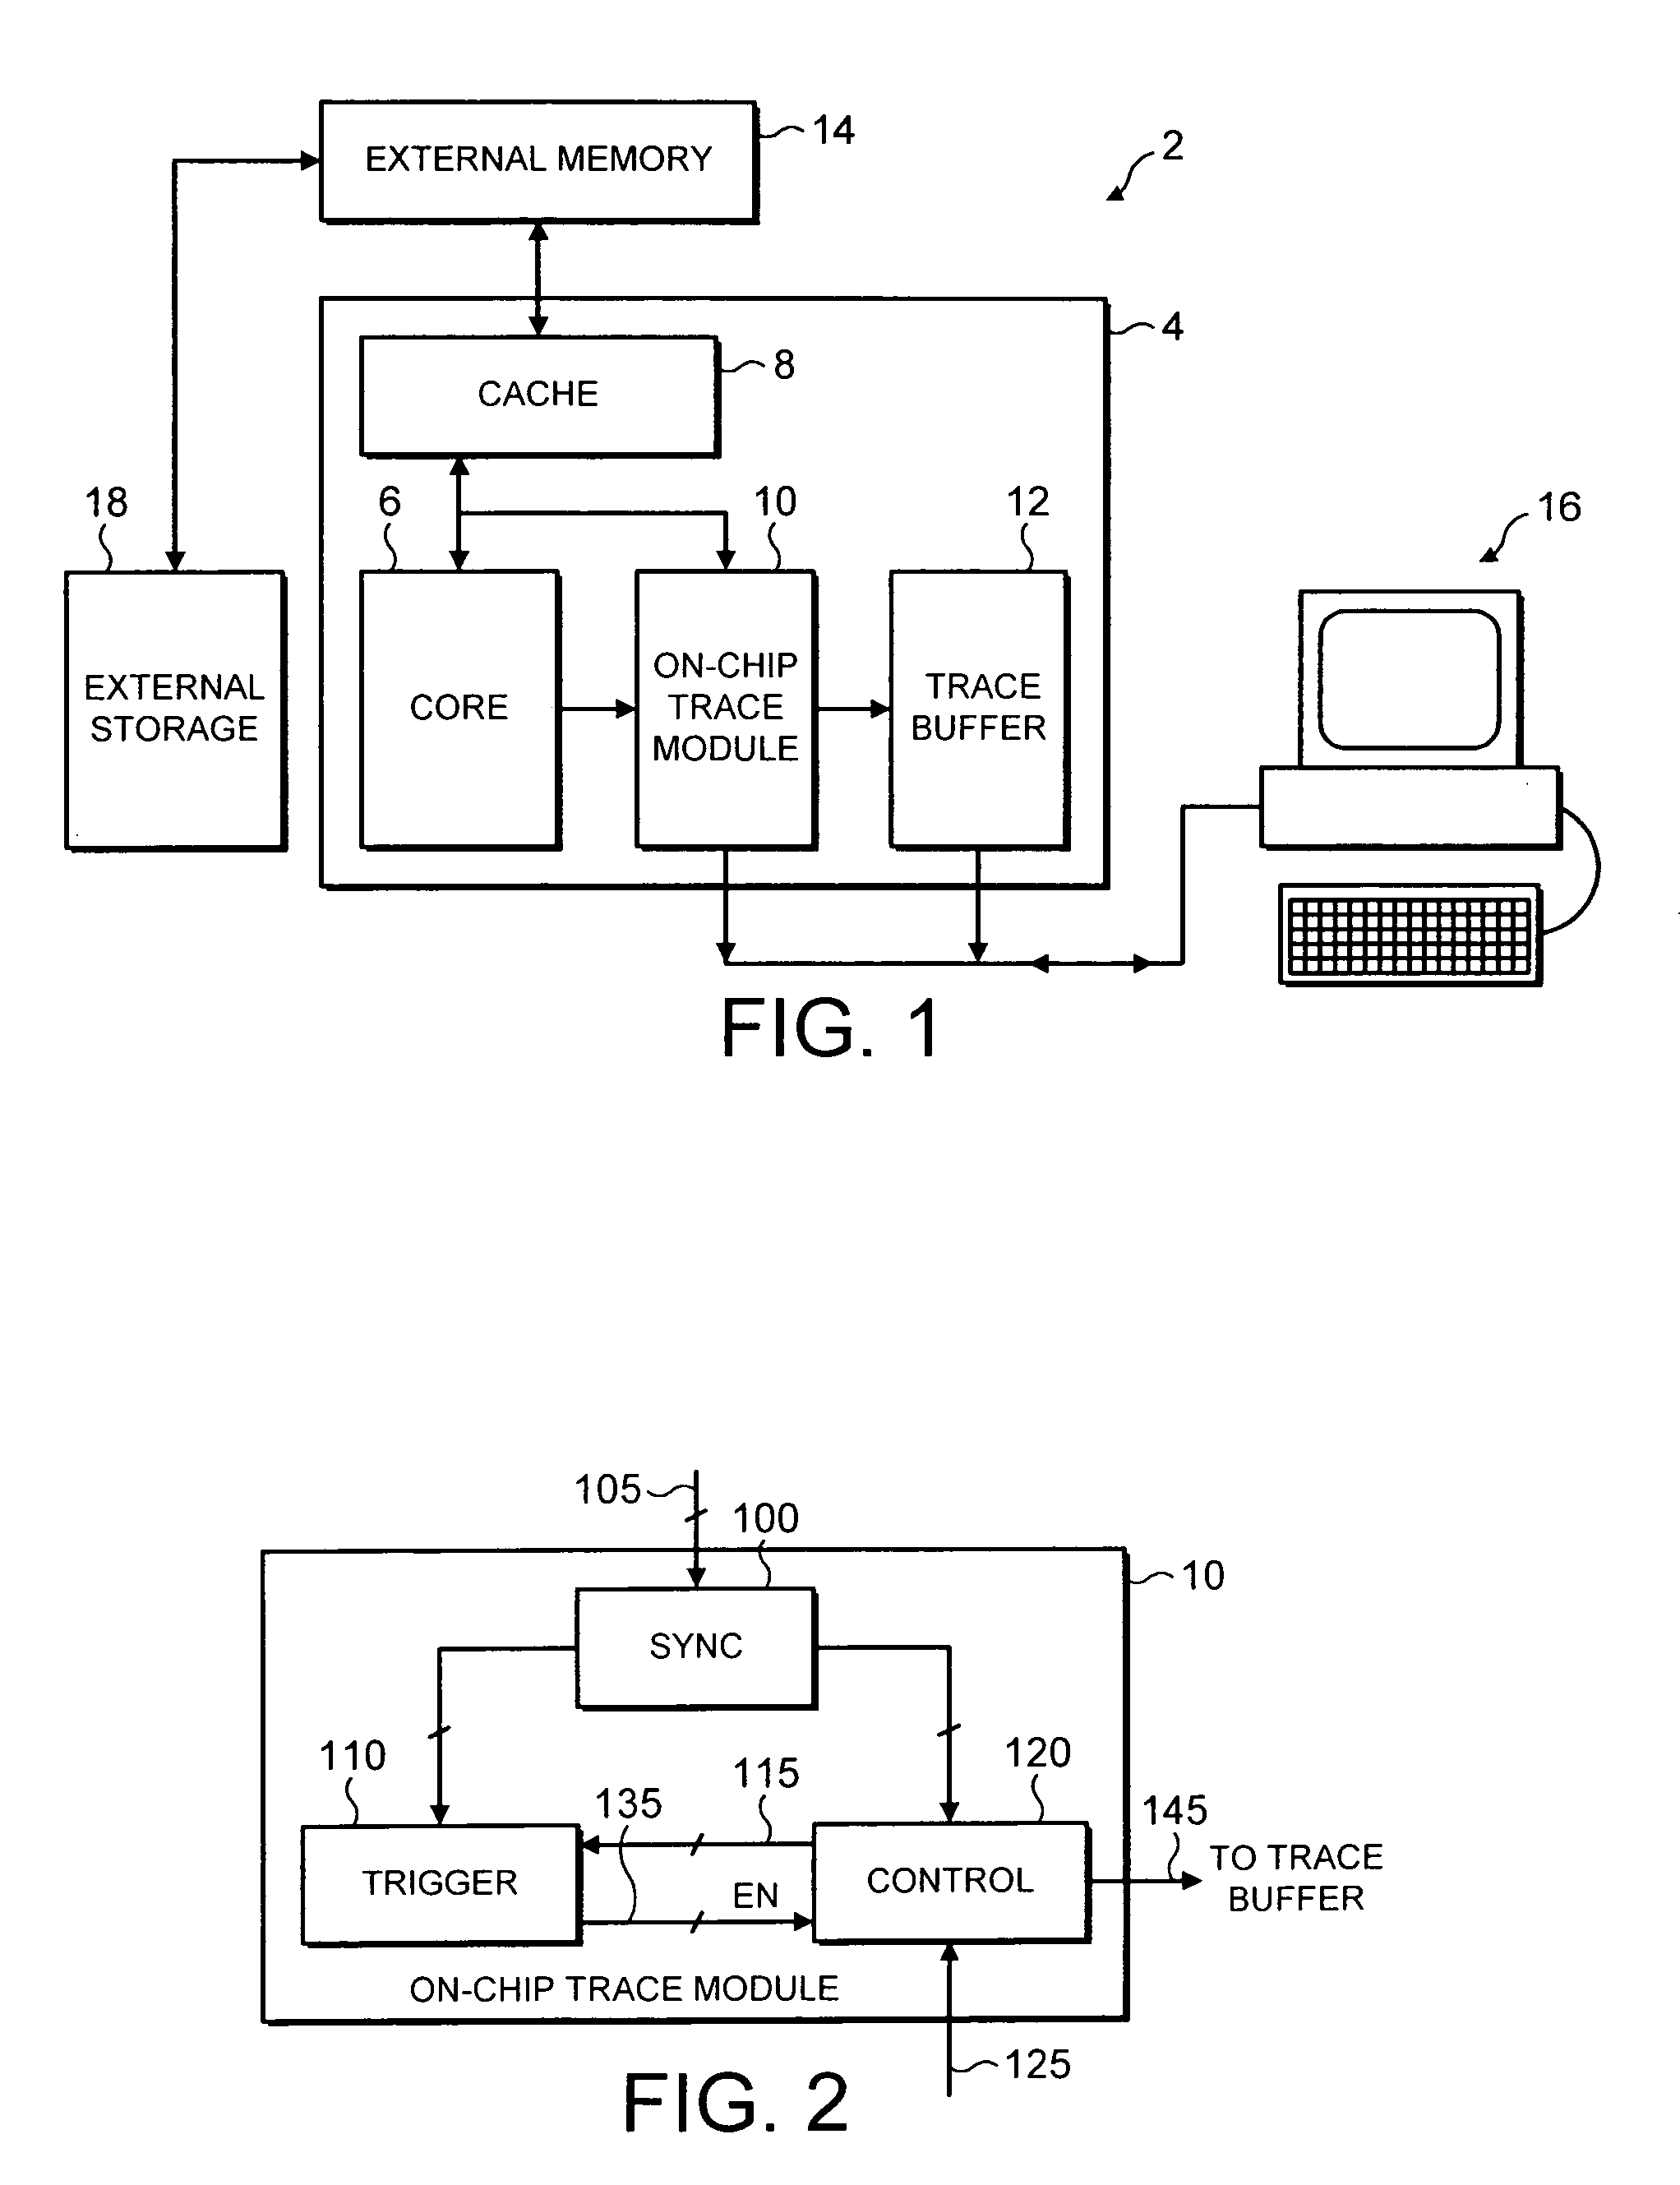 Apparatus and method for efficiently incorporating instruction set information with instruction addresses